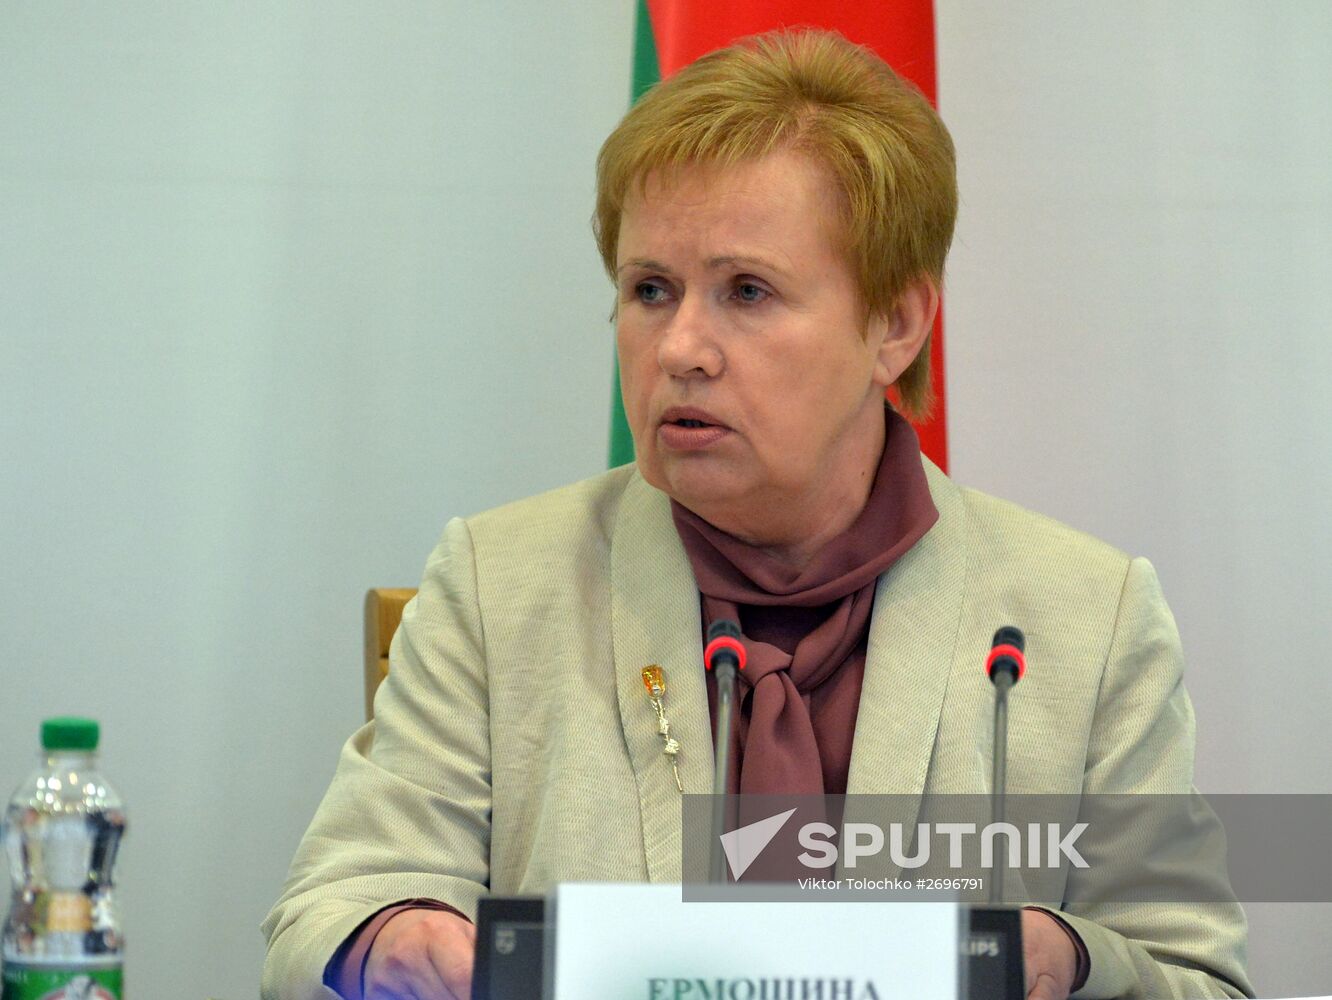 Belarusian presidential candidates receive IDs